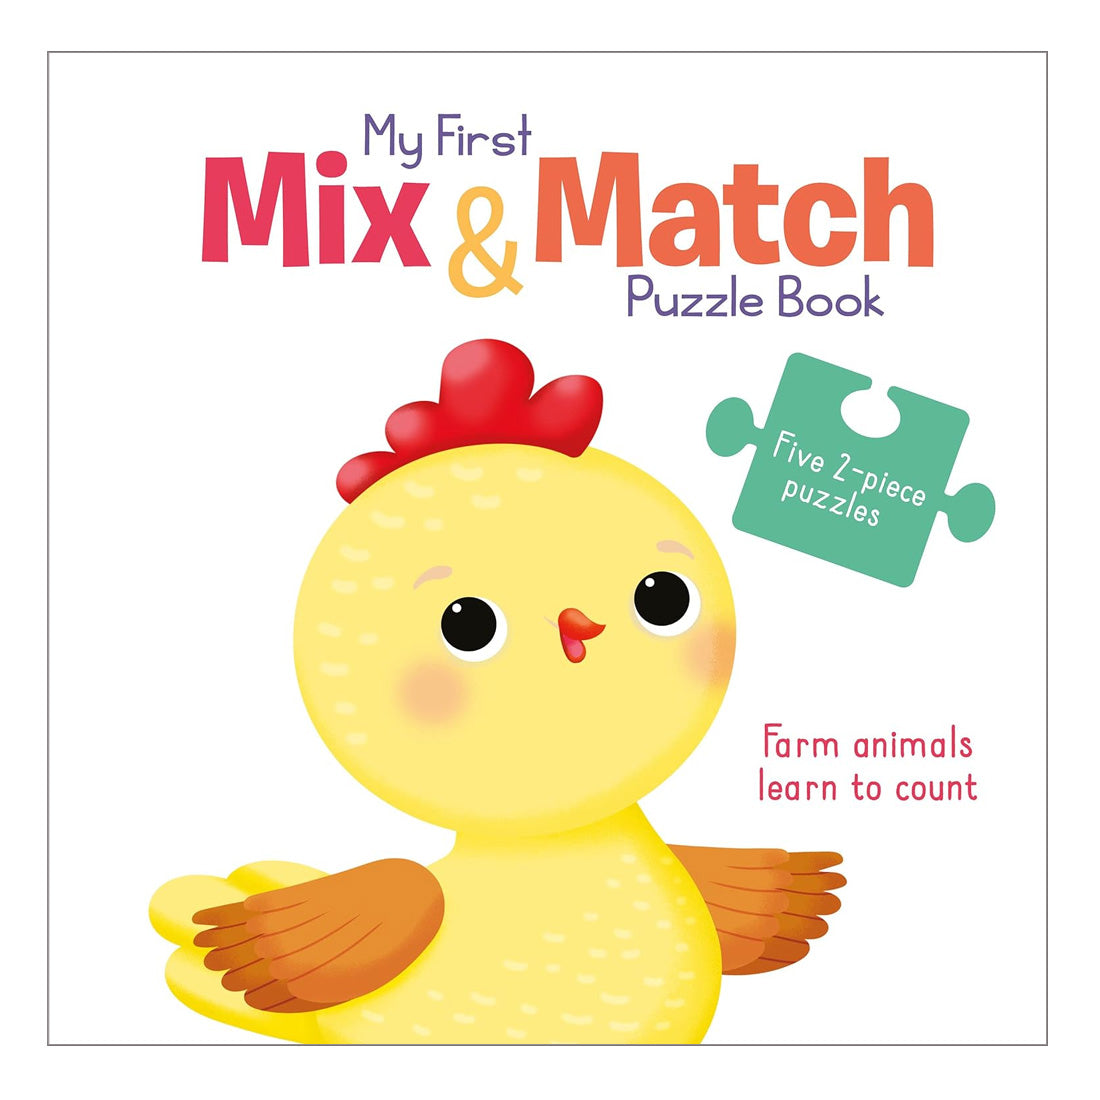 Mix & Match Puzzle Book: Farm Animals Learn To Count